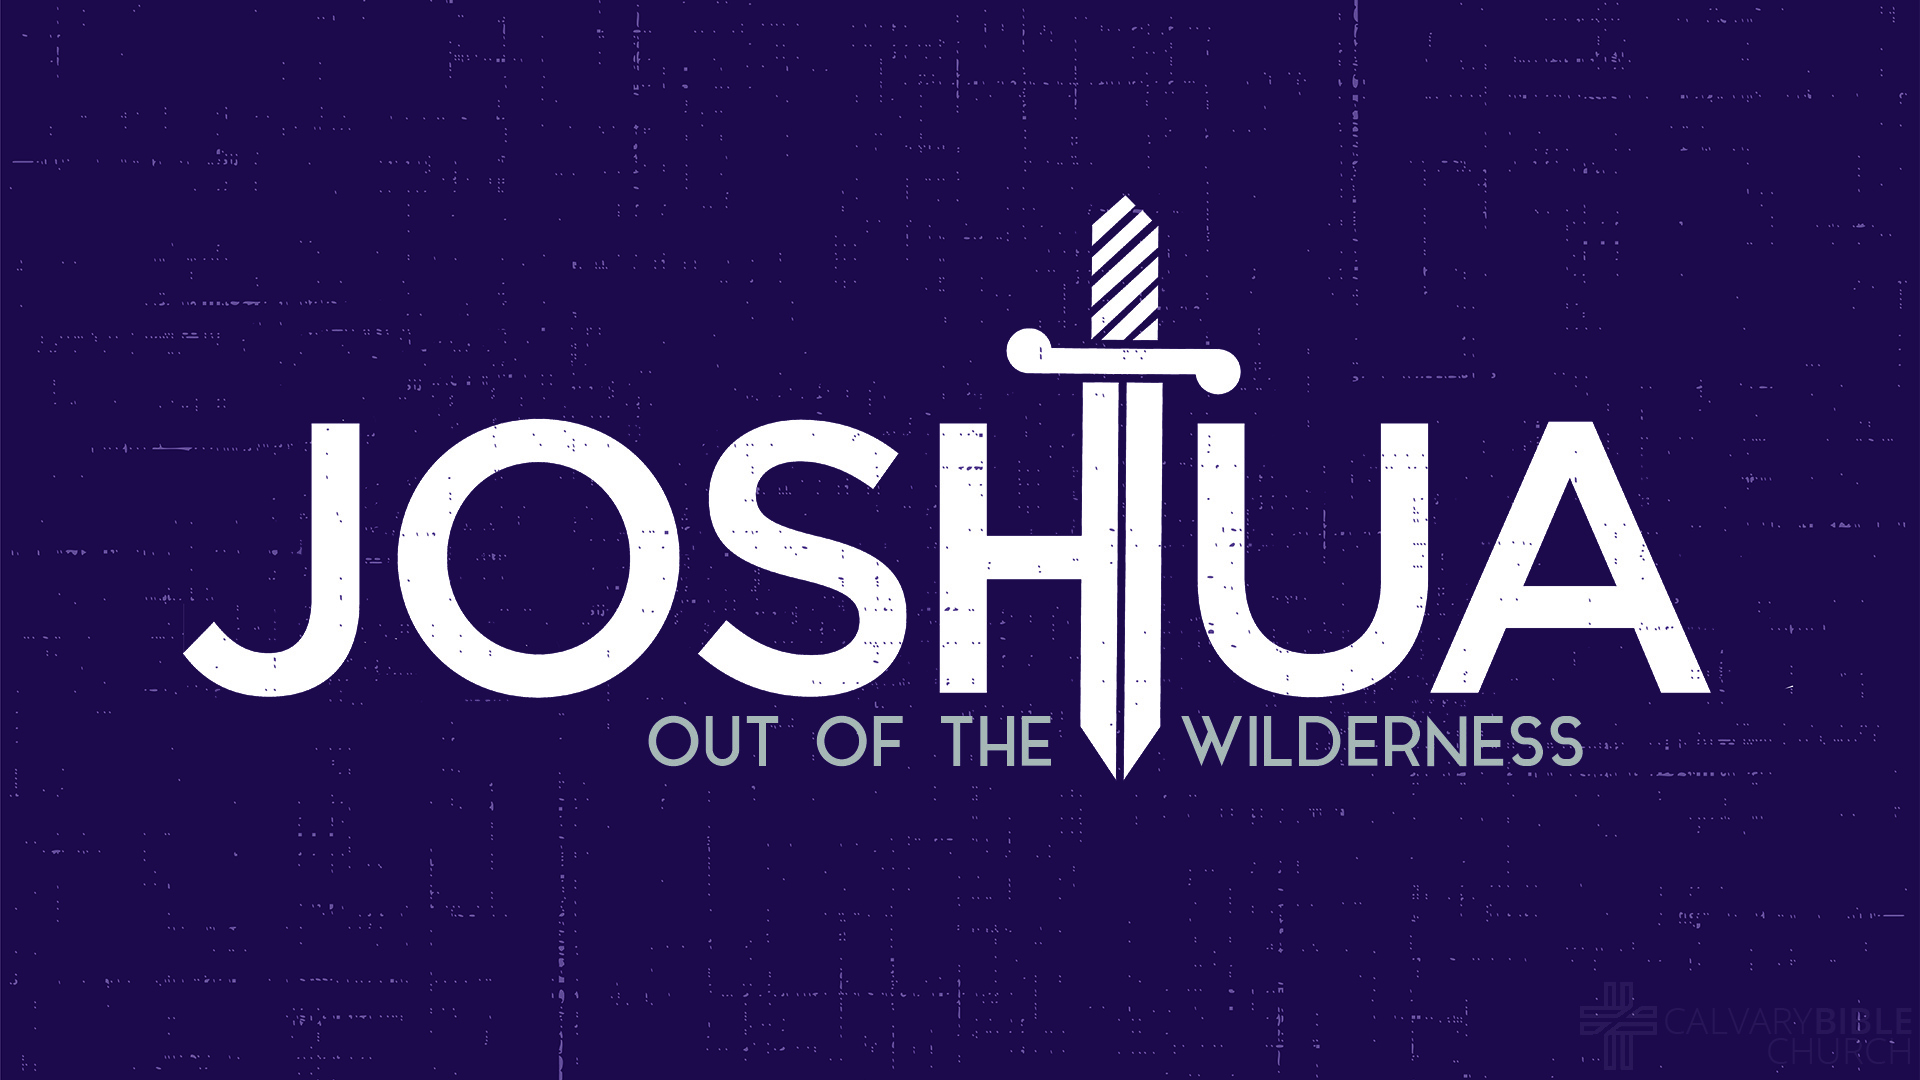 Joshua: Out of the Wilderness